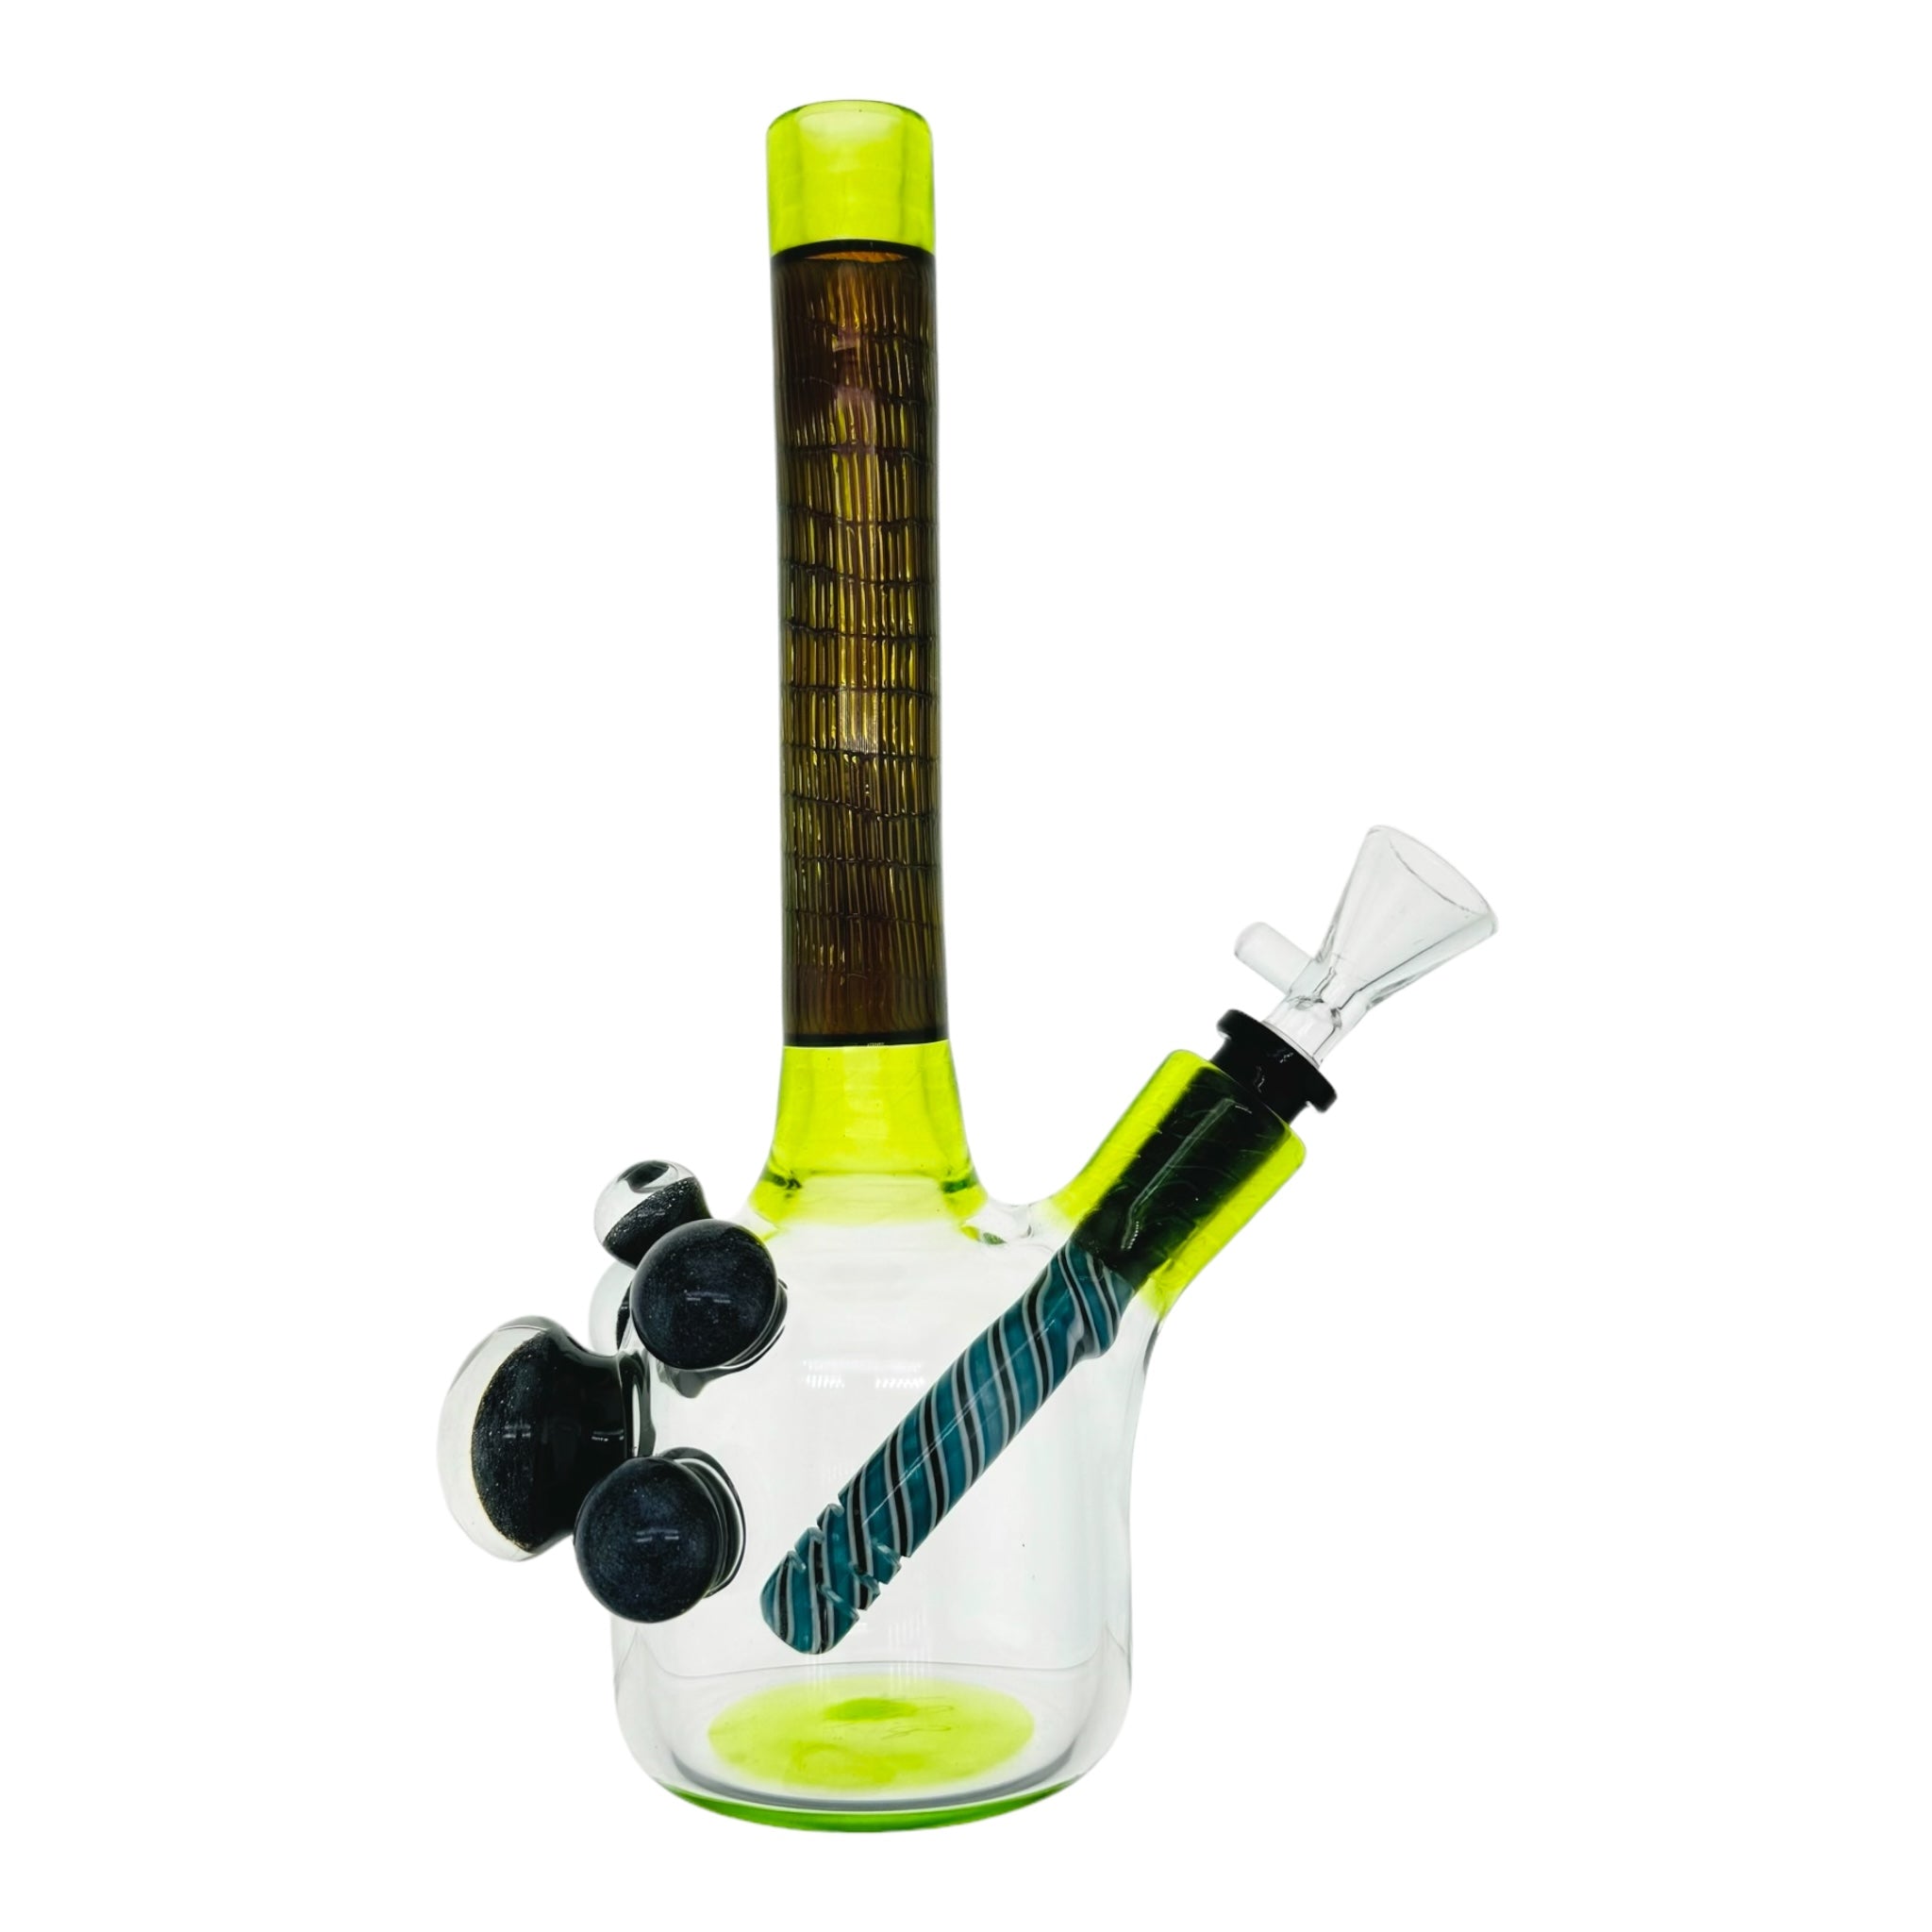 Dave Park Glass Bong And Dab Rig Sublime Green Mini Tube With Bamboo Air Trap Neck